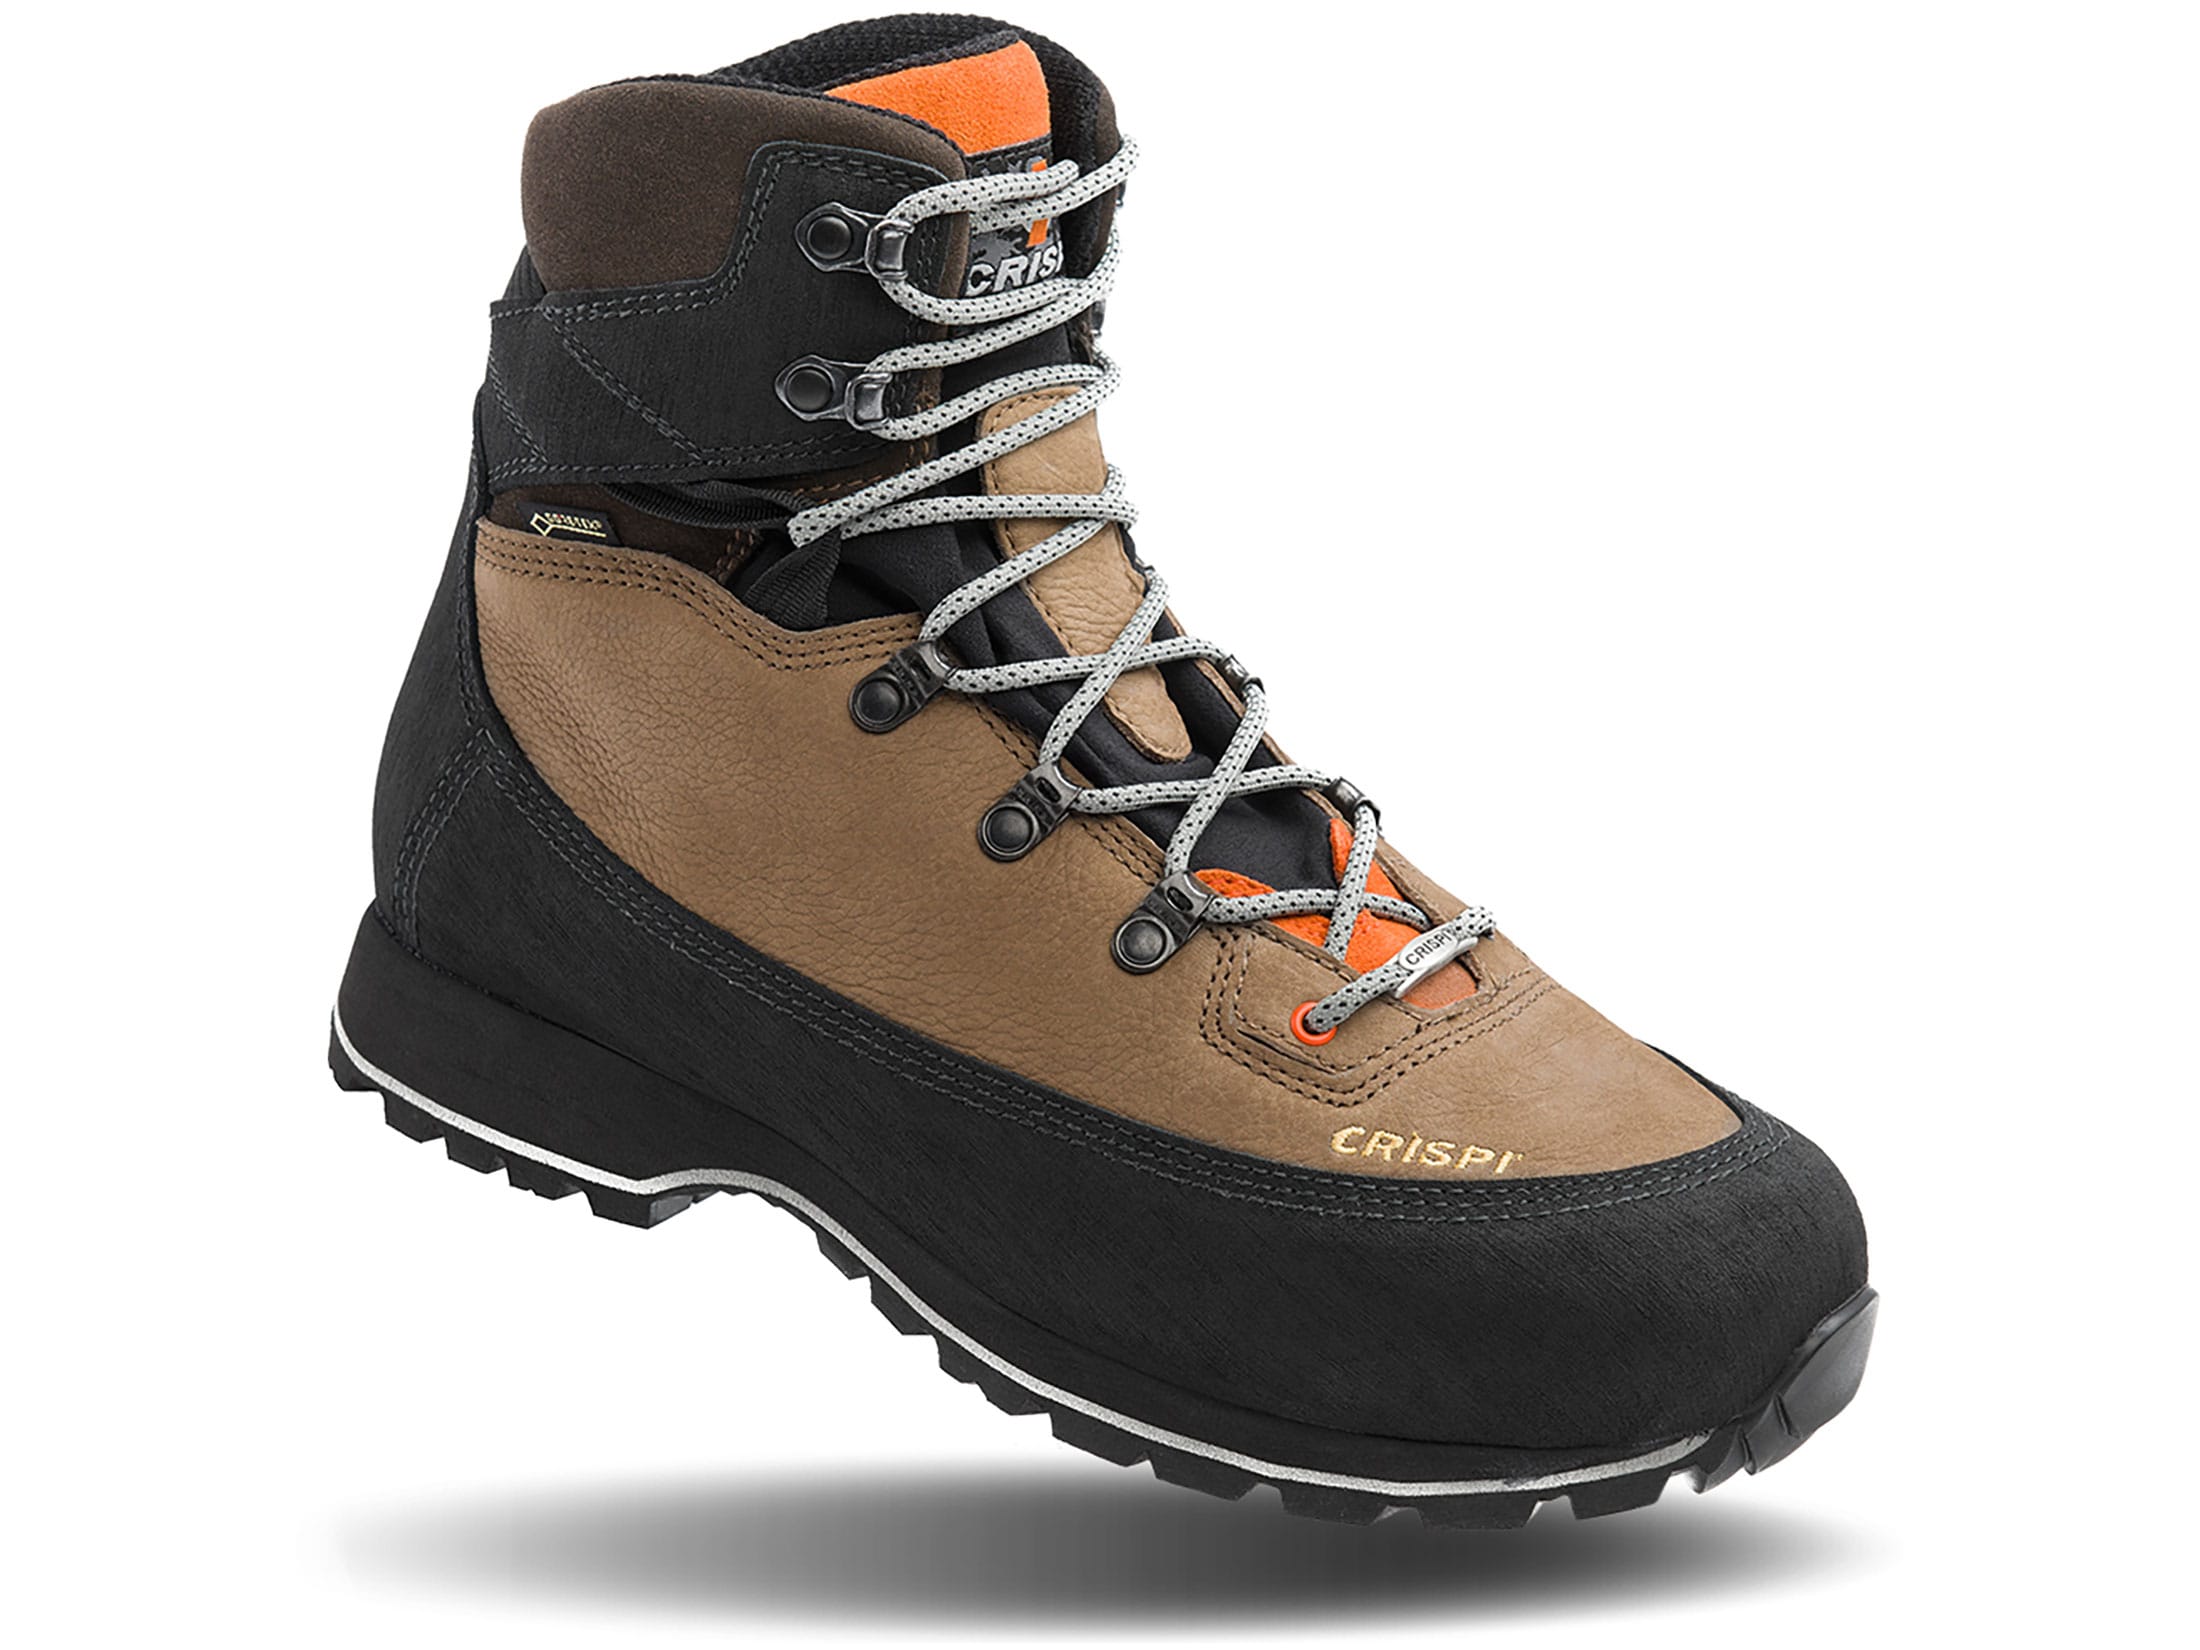 8 hiking boots